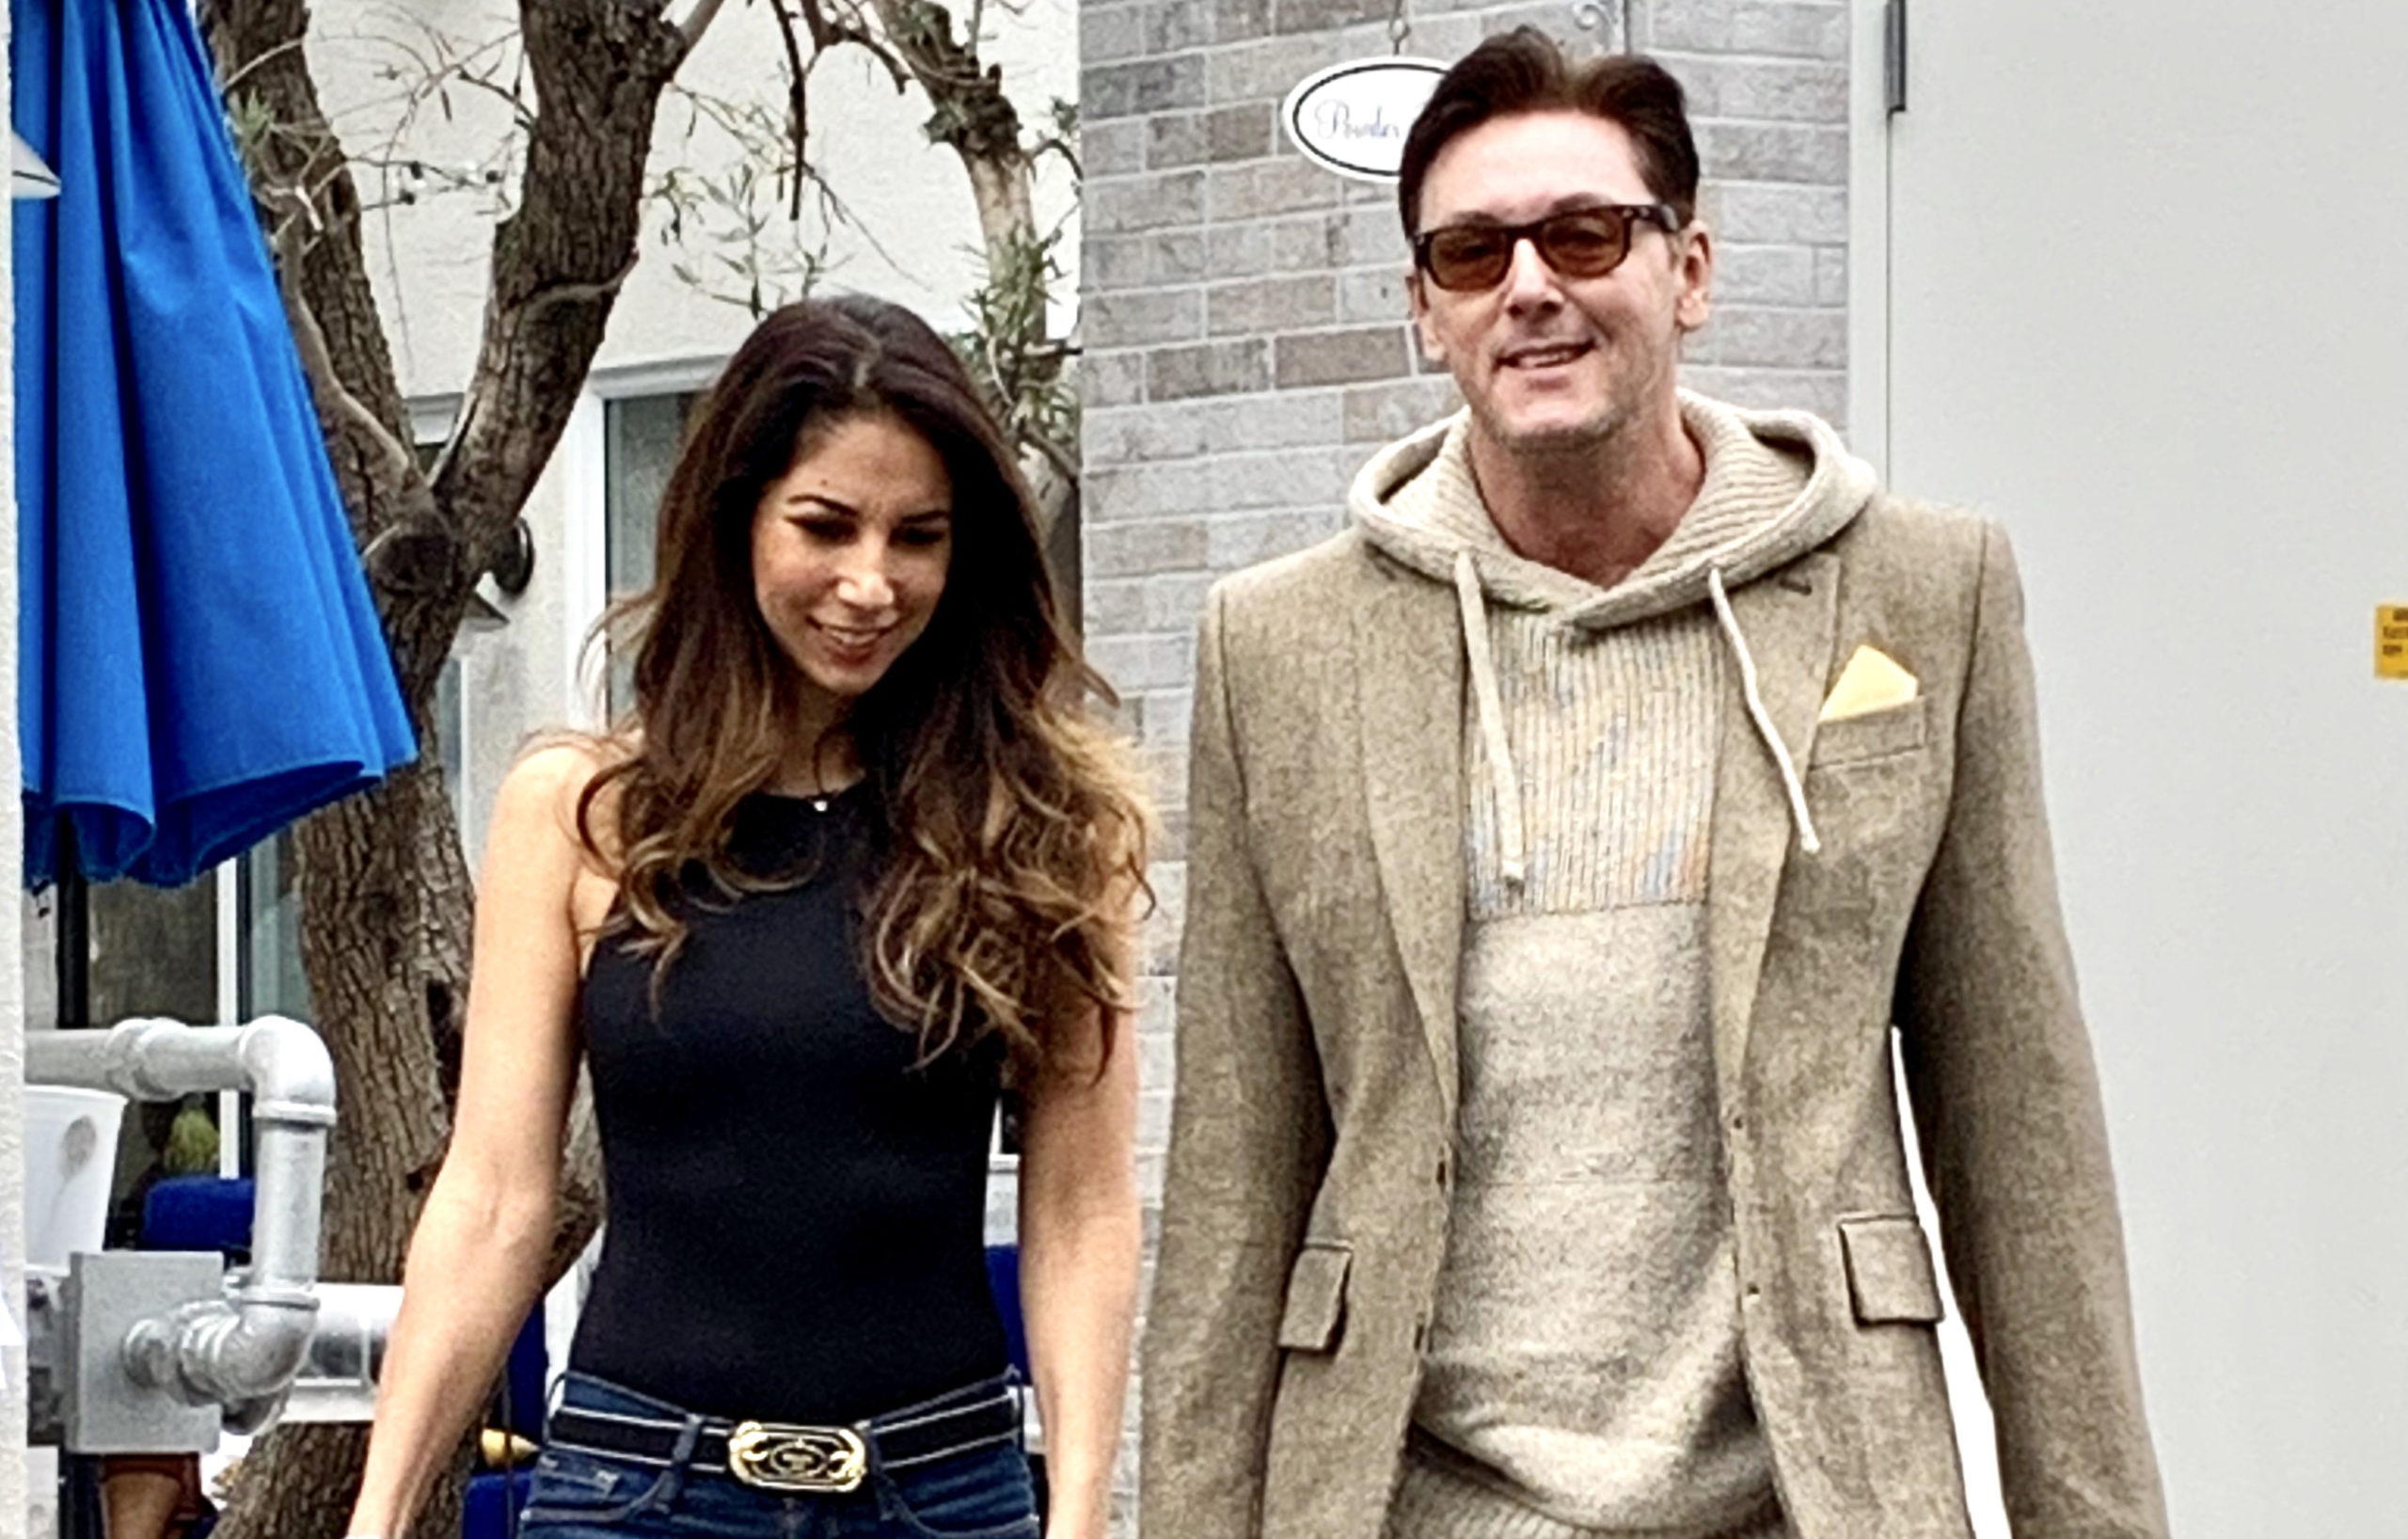 Real Housewives' star Leilani Dowding and Sean Borg Spotted in West Hollywood